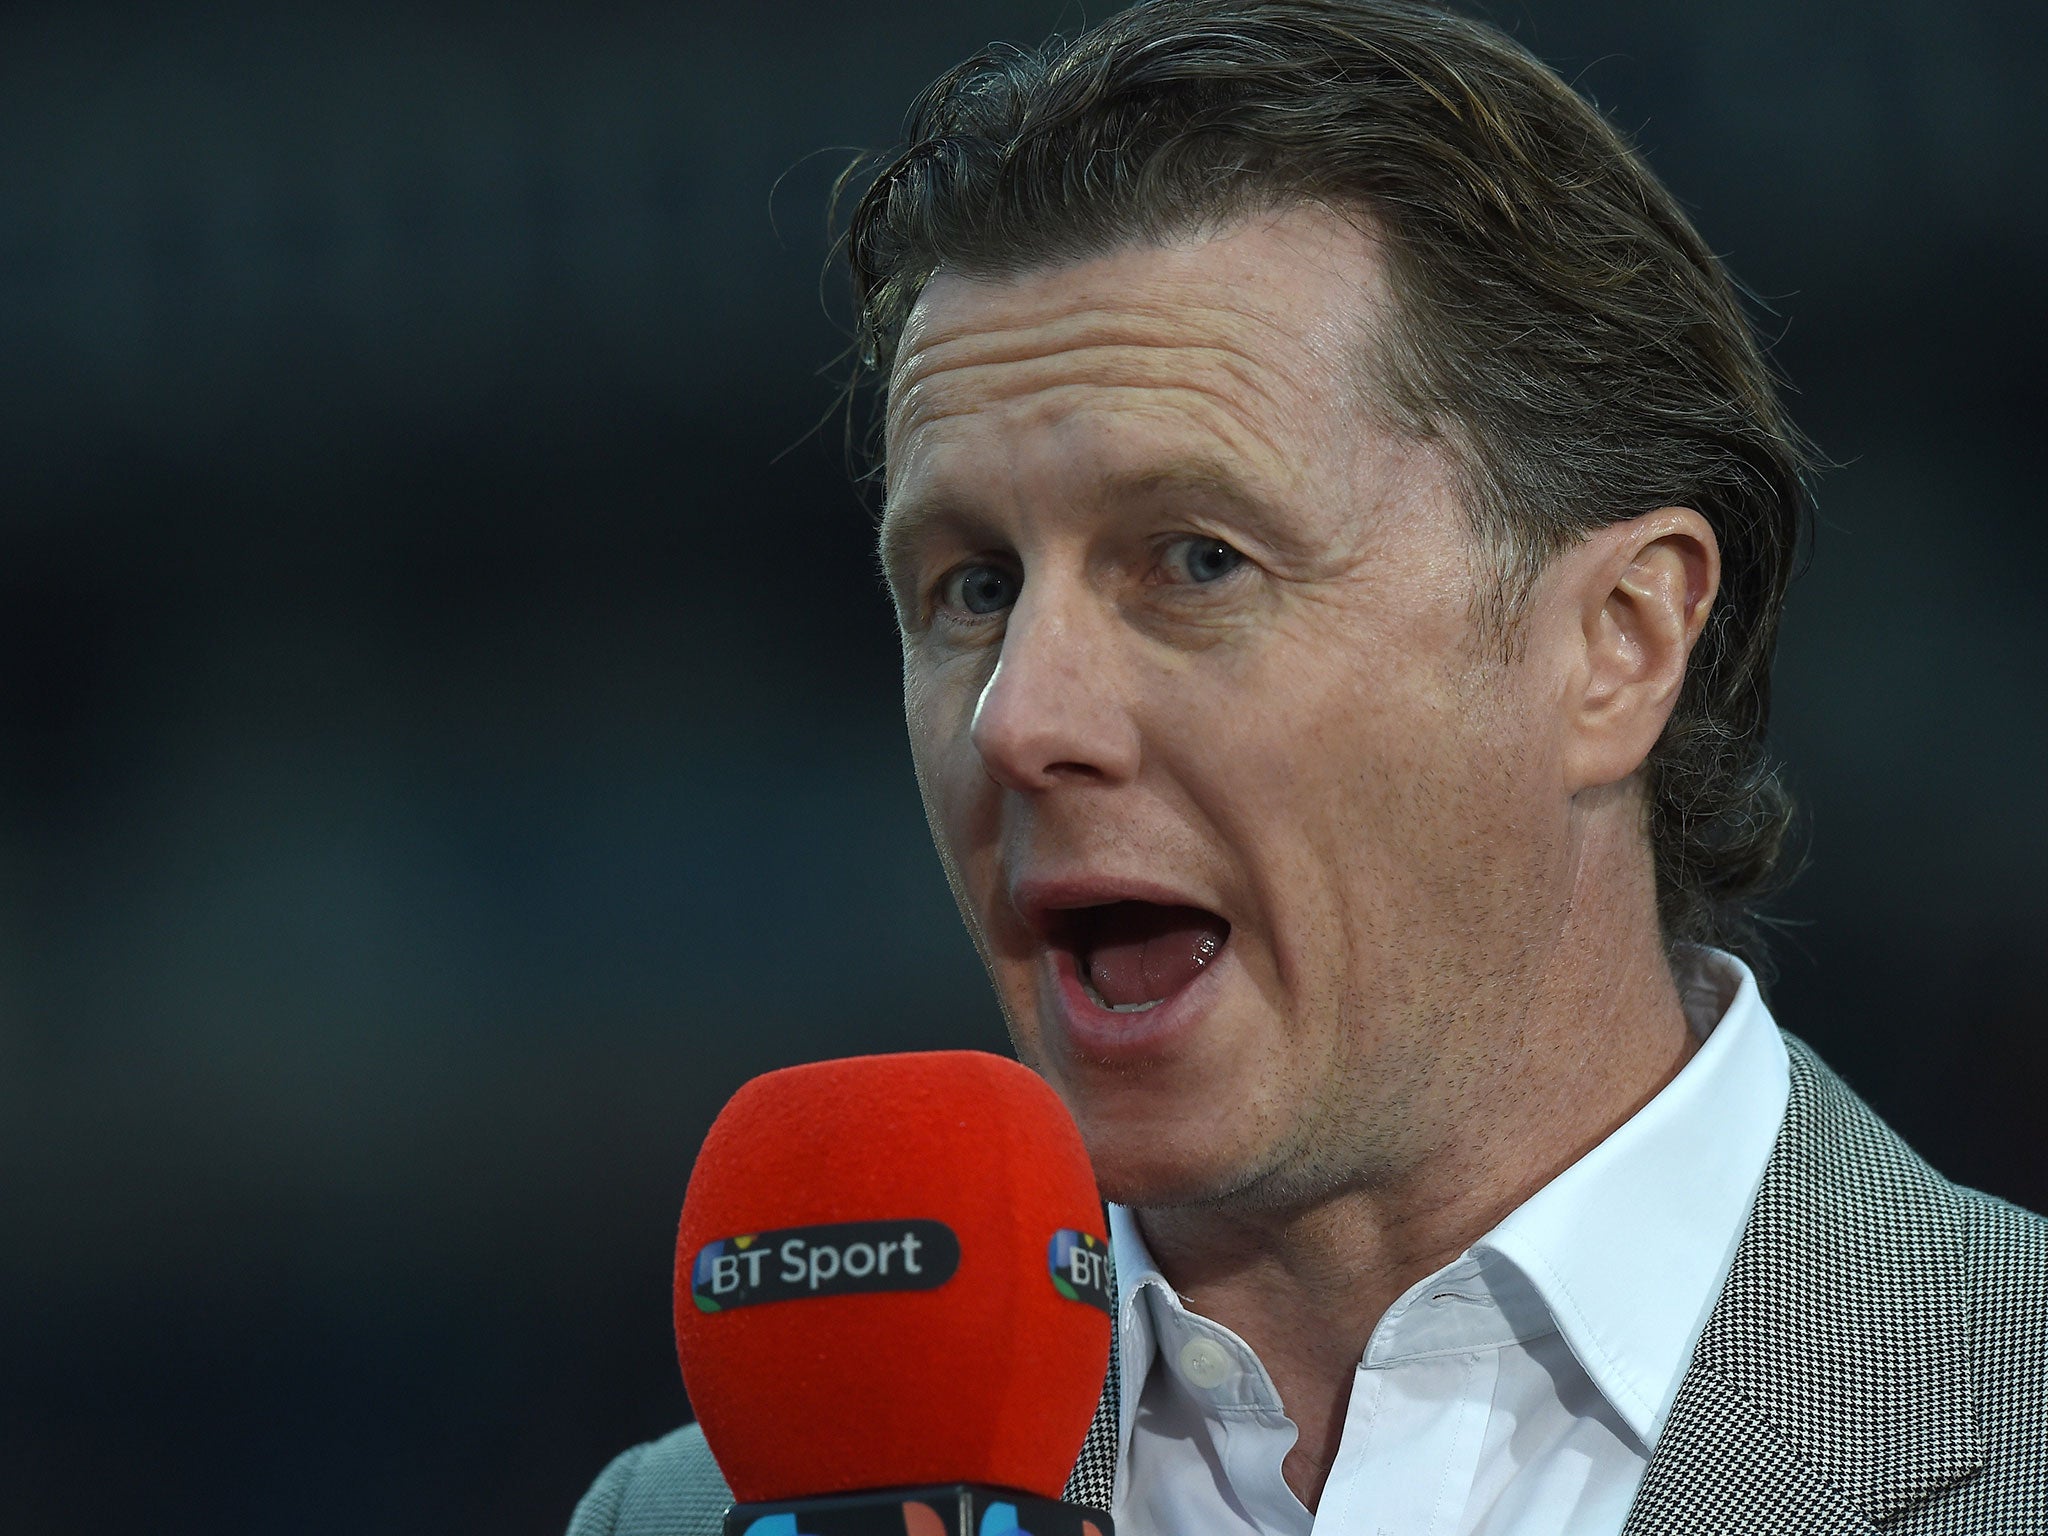 Steve McManaman is currently a pundit with BT Sport